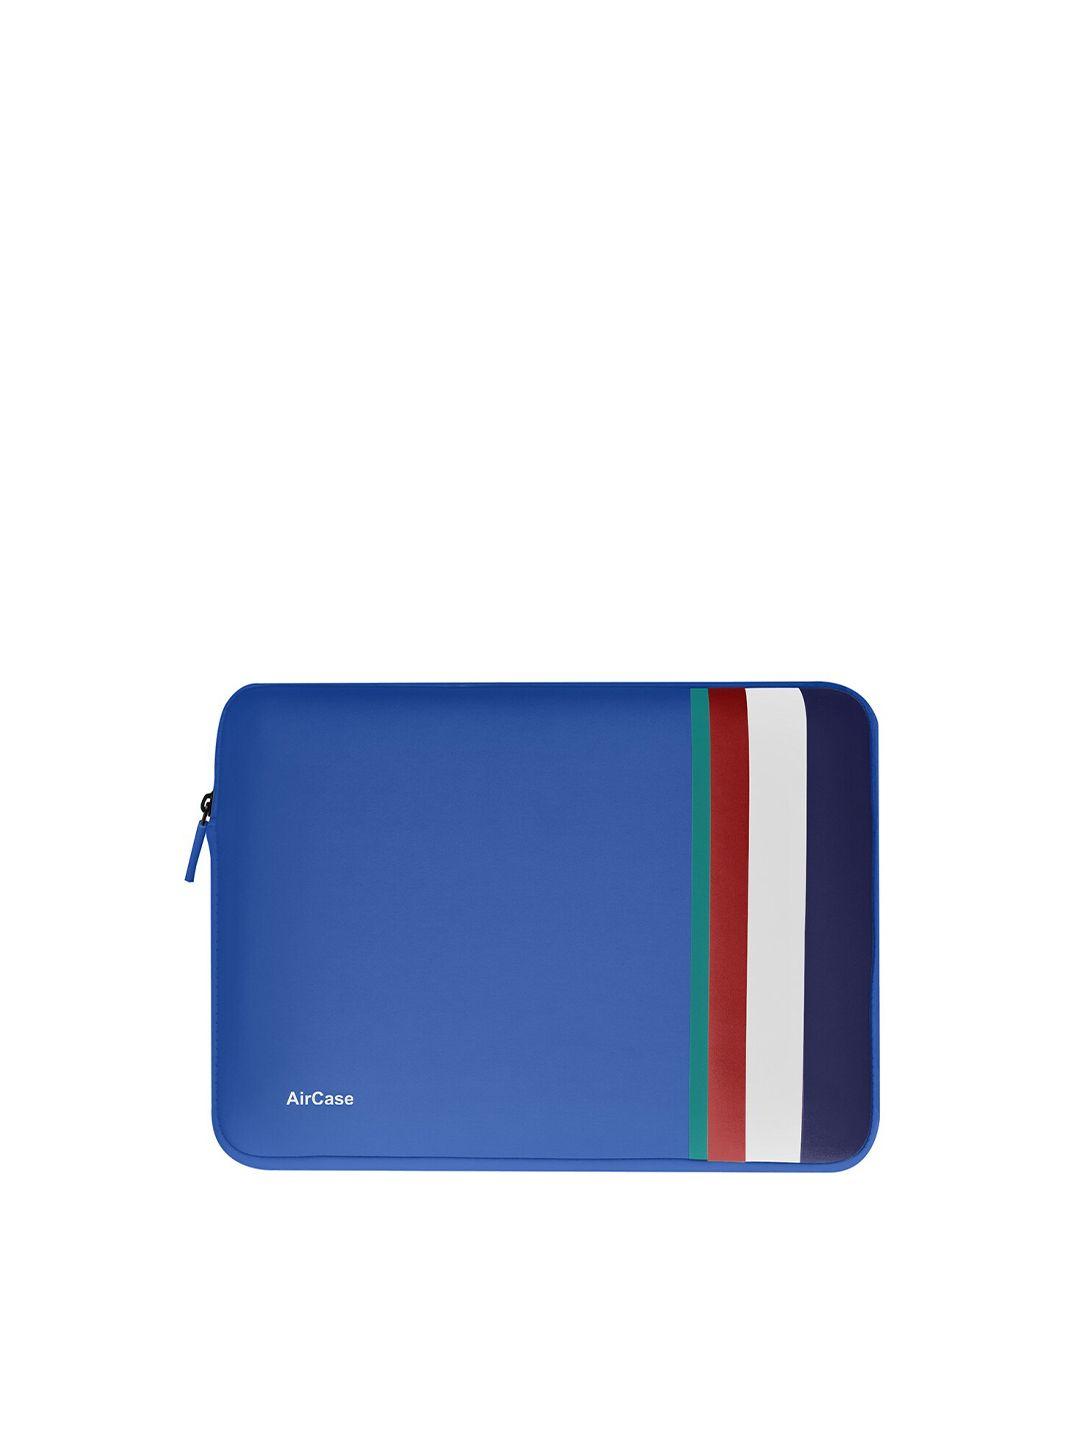 aircase unisex royal blue solid 15.6 inch laptop sleeve